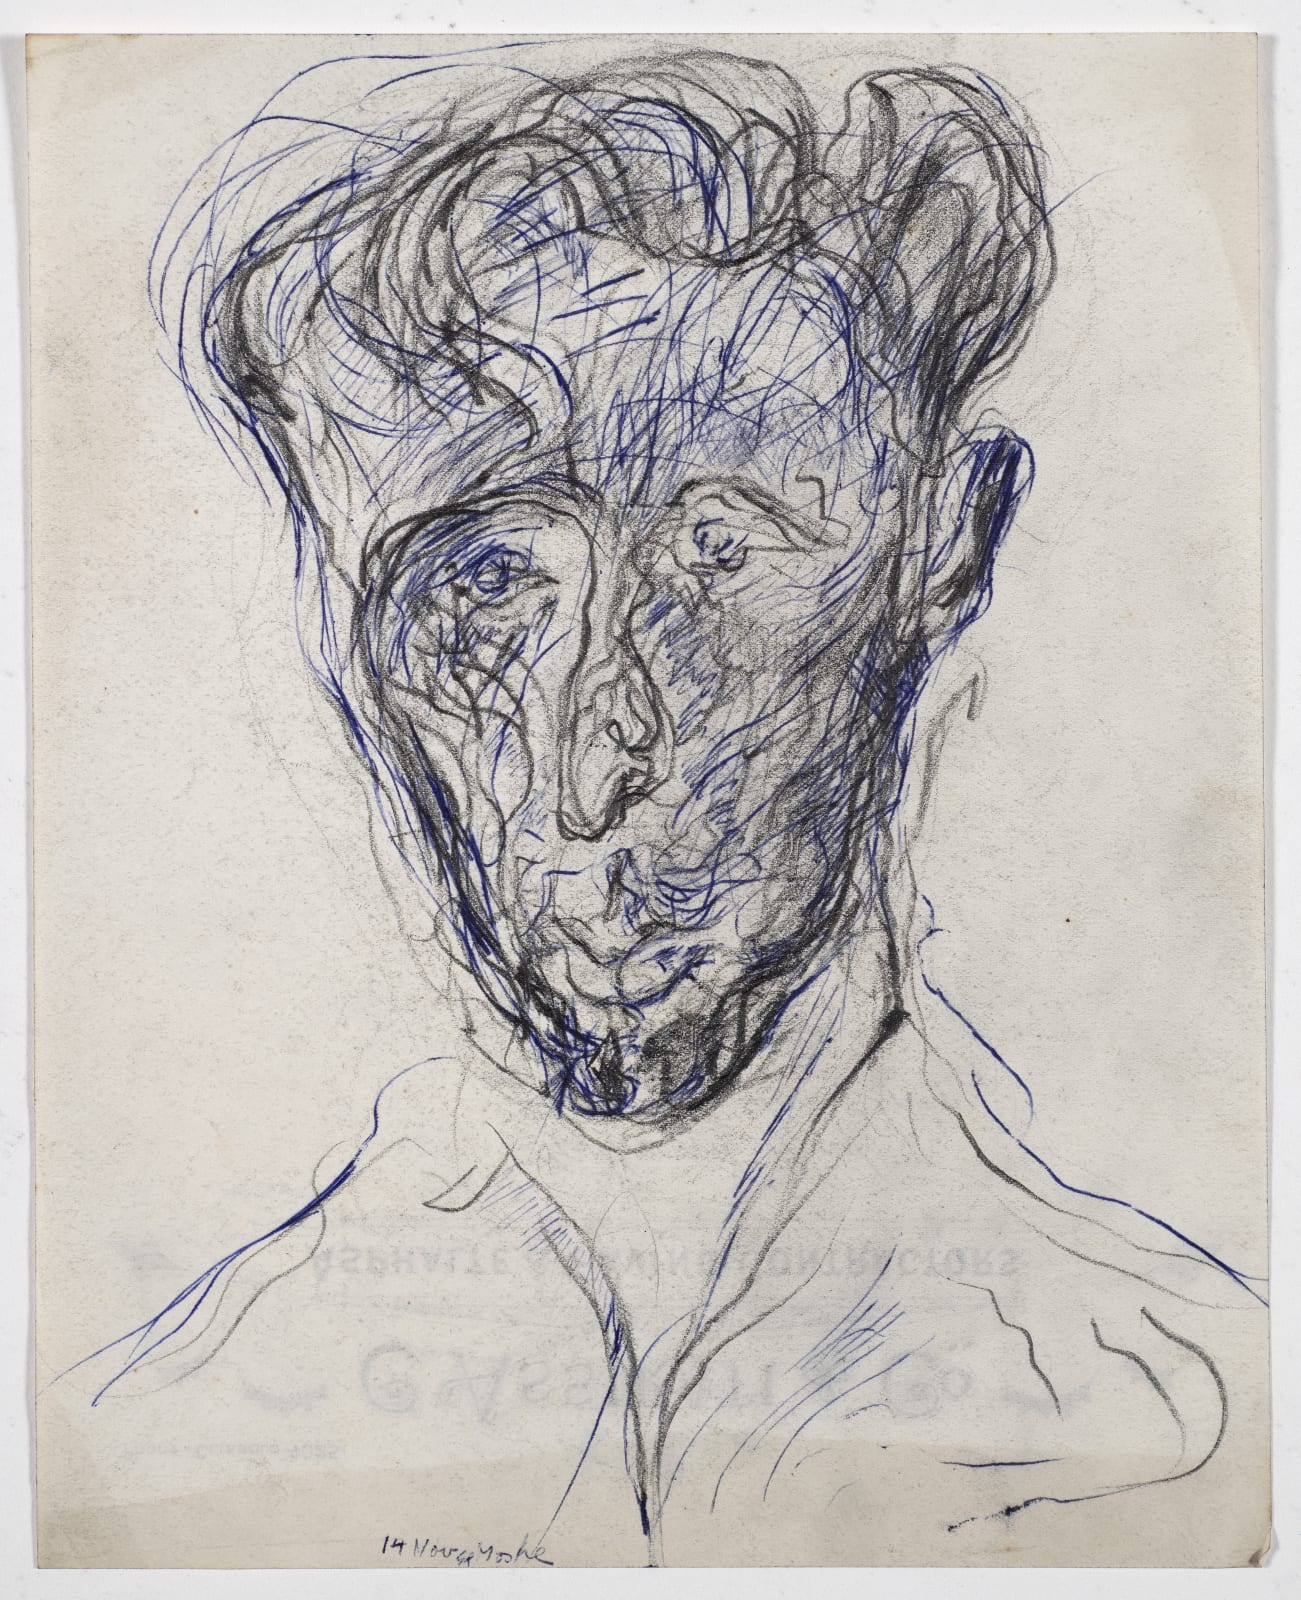 Untitled, 1948-49 Pencil and pen on paper 25.6 x 20.2cm The Gustav Metzger Foundation